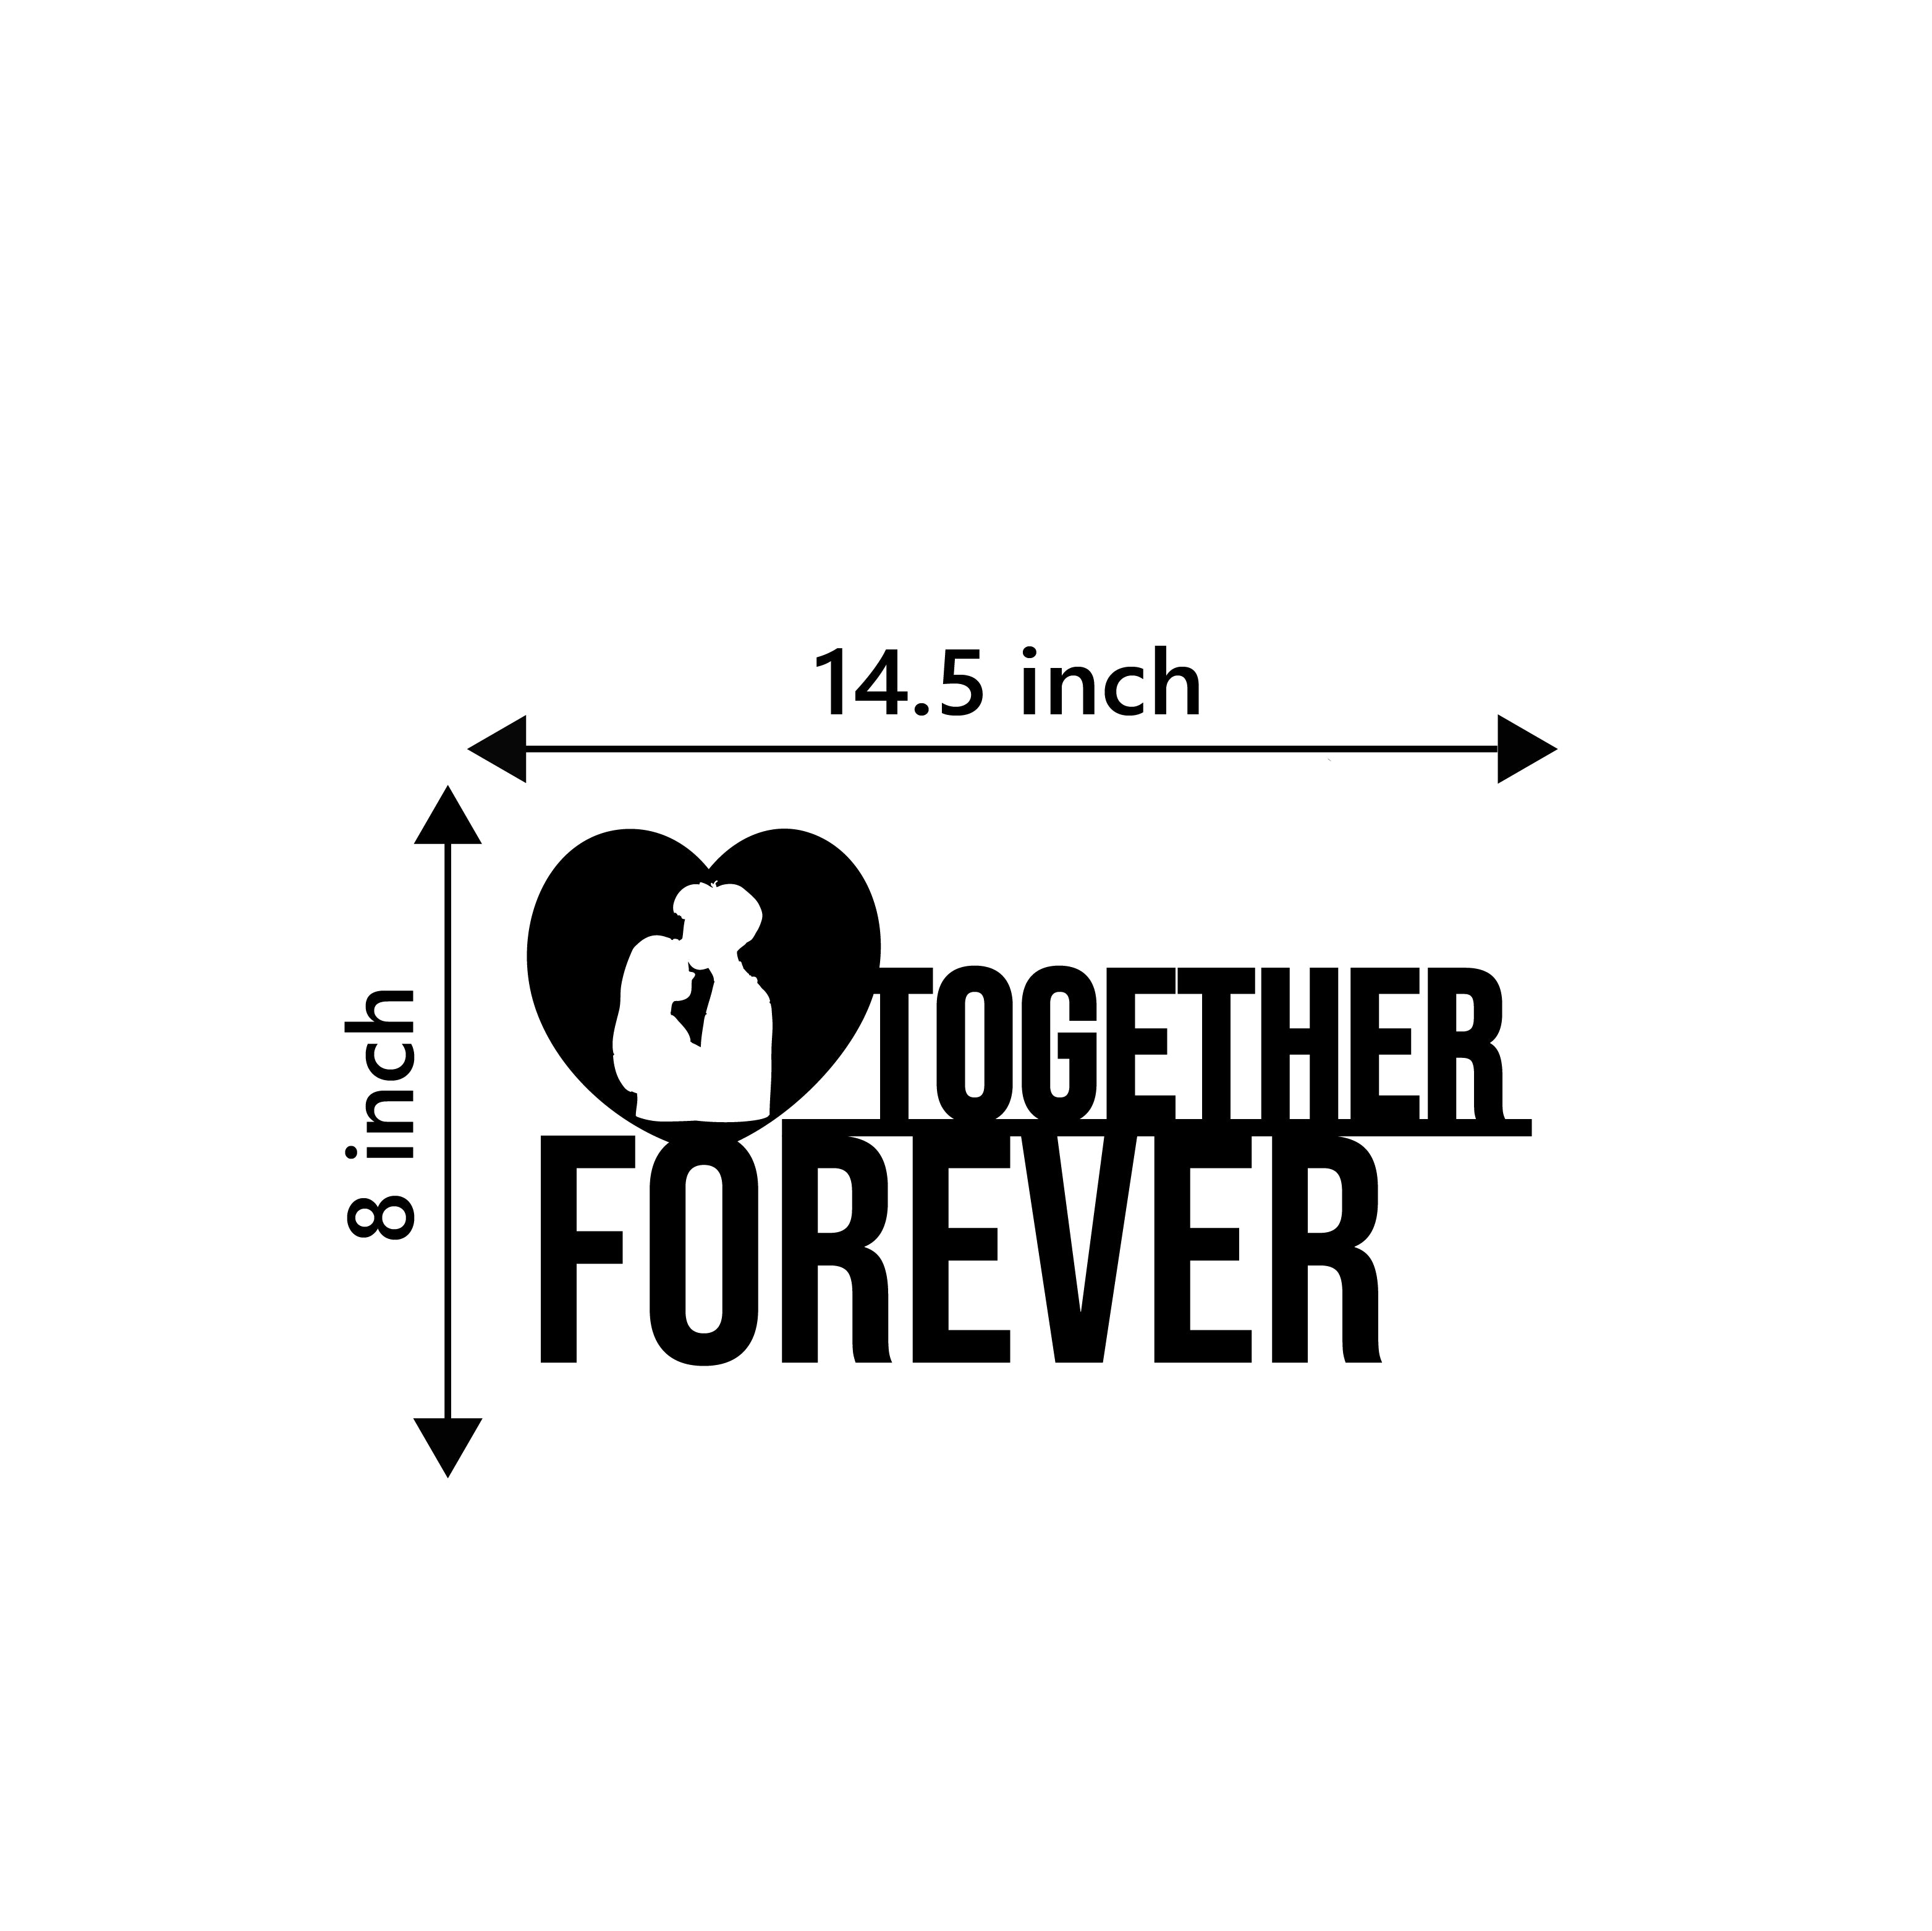 "Together Forever" Black Engineered Wood Wall Art Cutout, Ready to Hang Home Decor 3